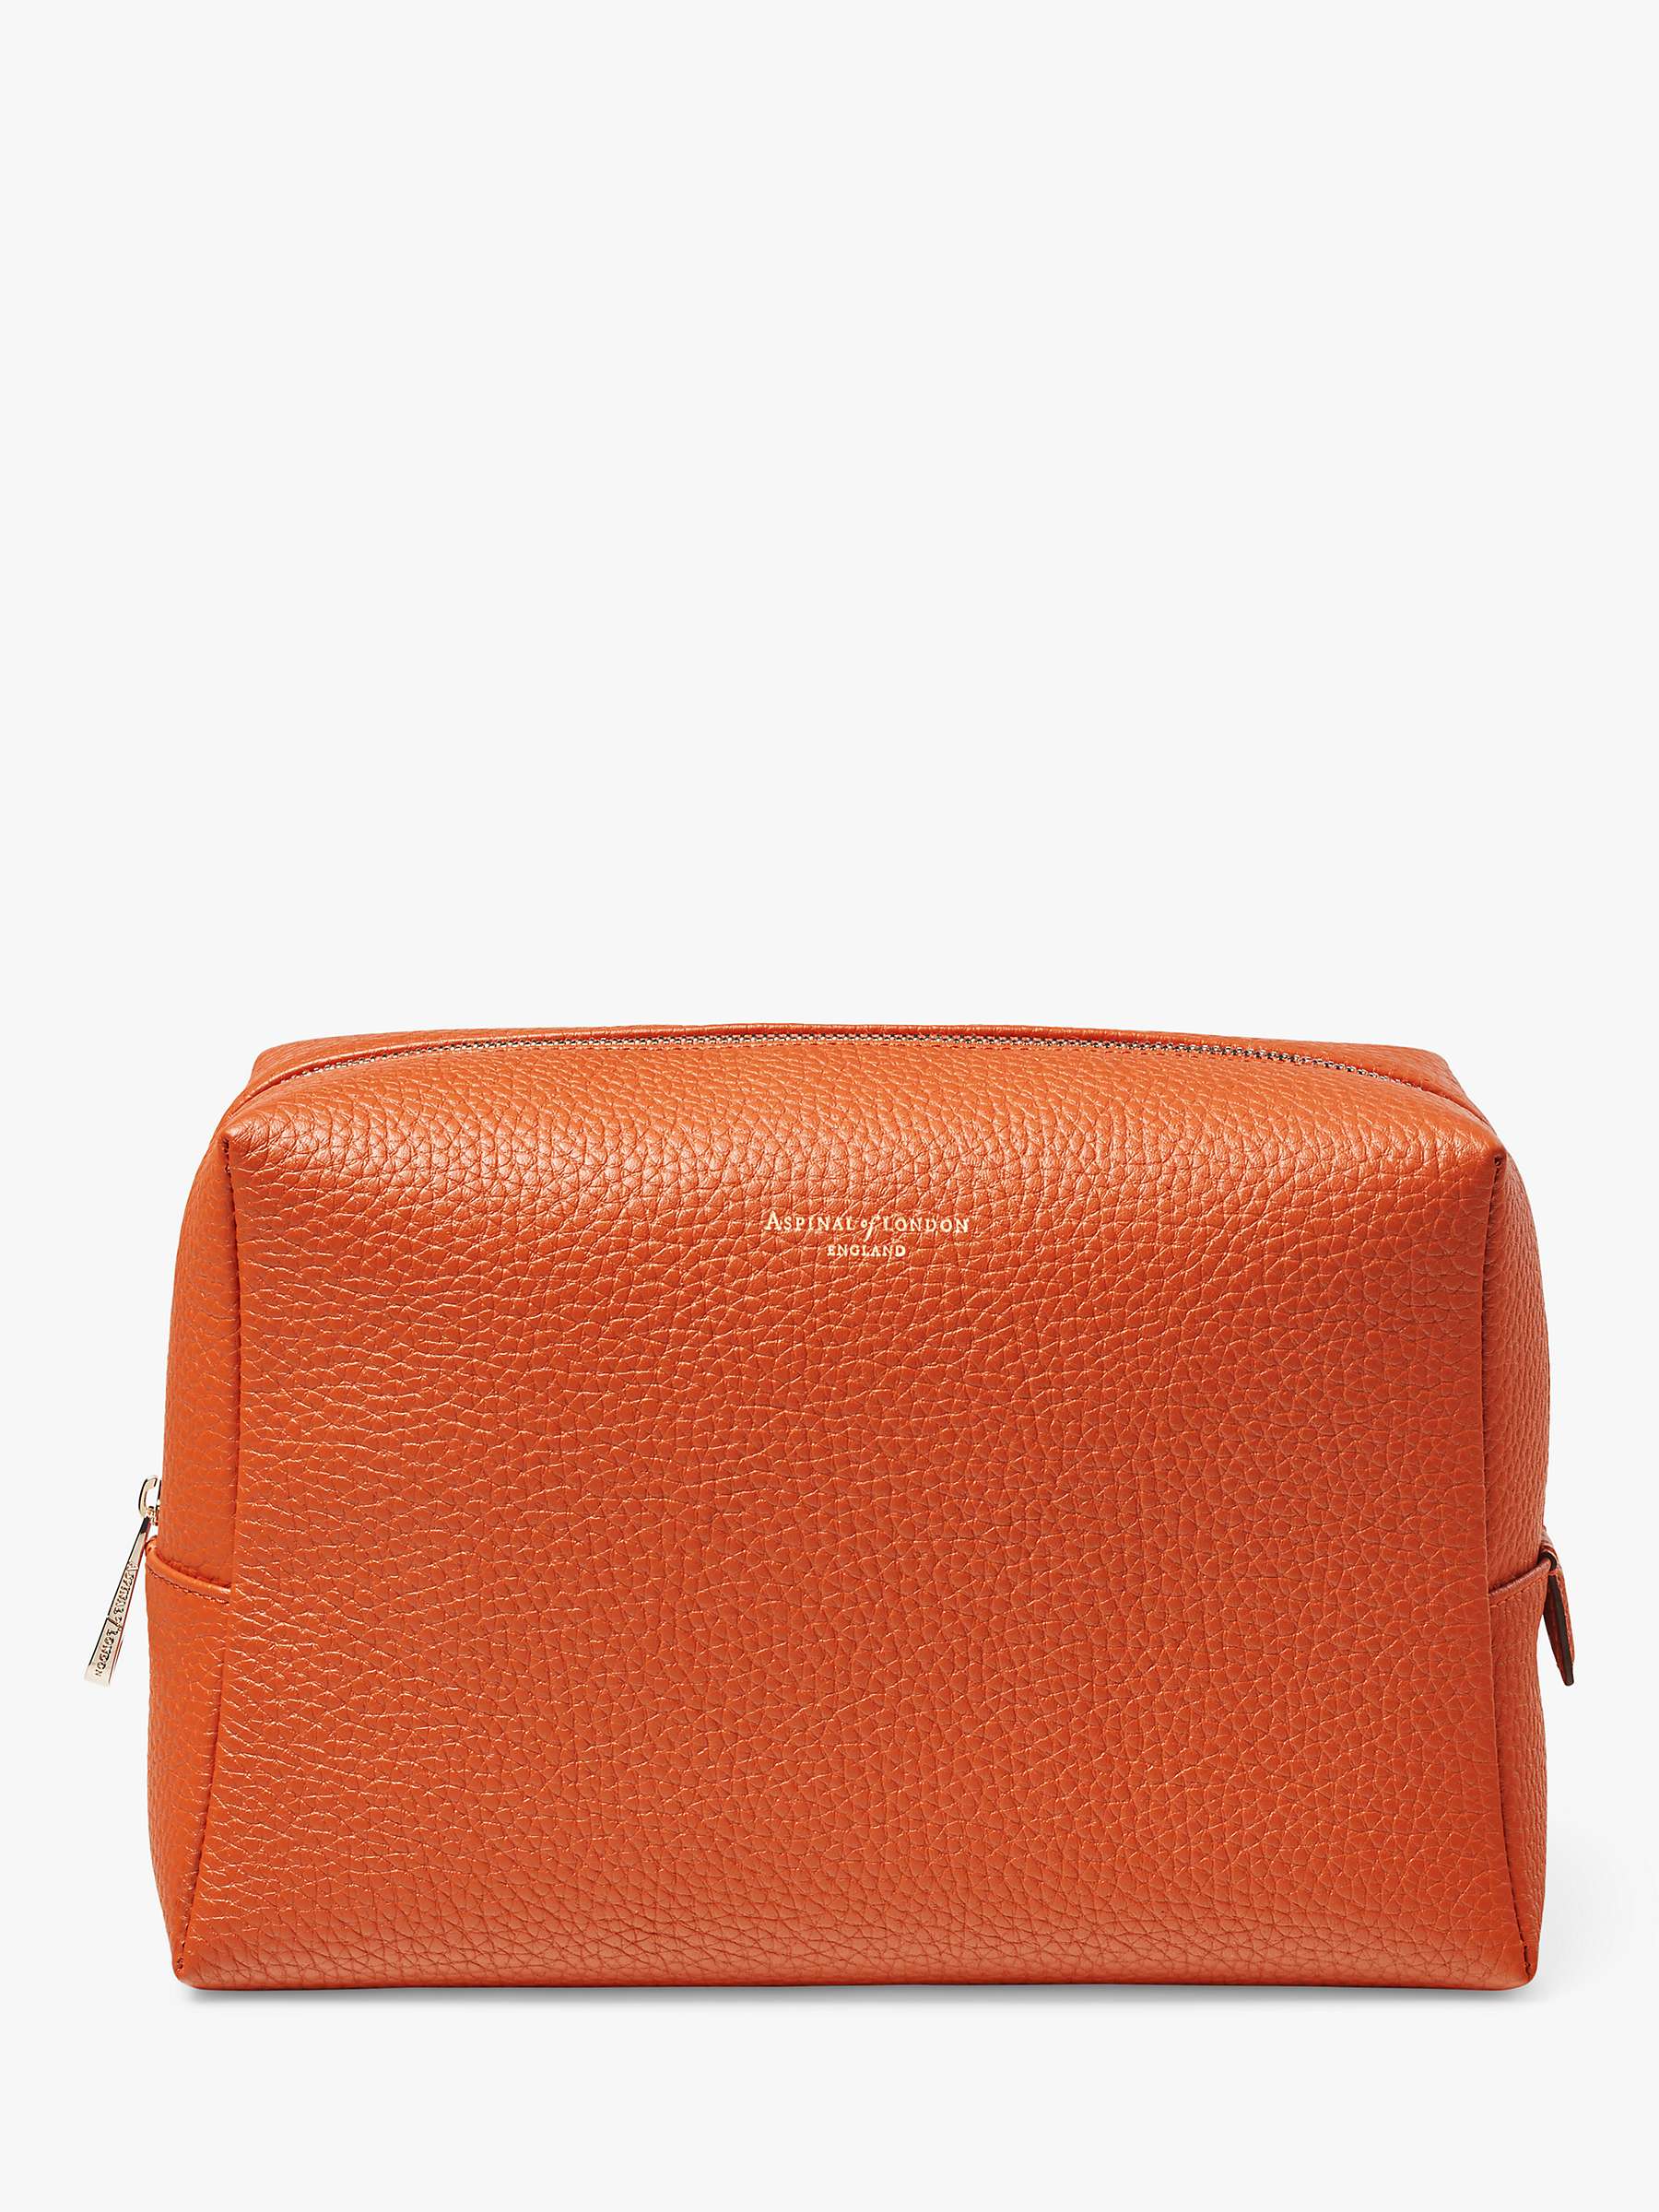 Buy Aspinal of London Large Pebble Leather Toiletry Bag Online at johnlewis.com